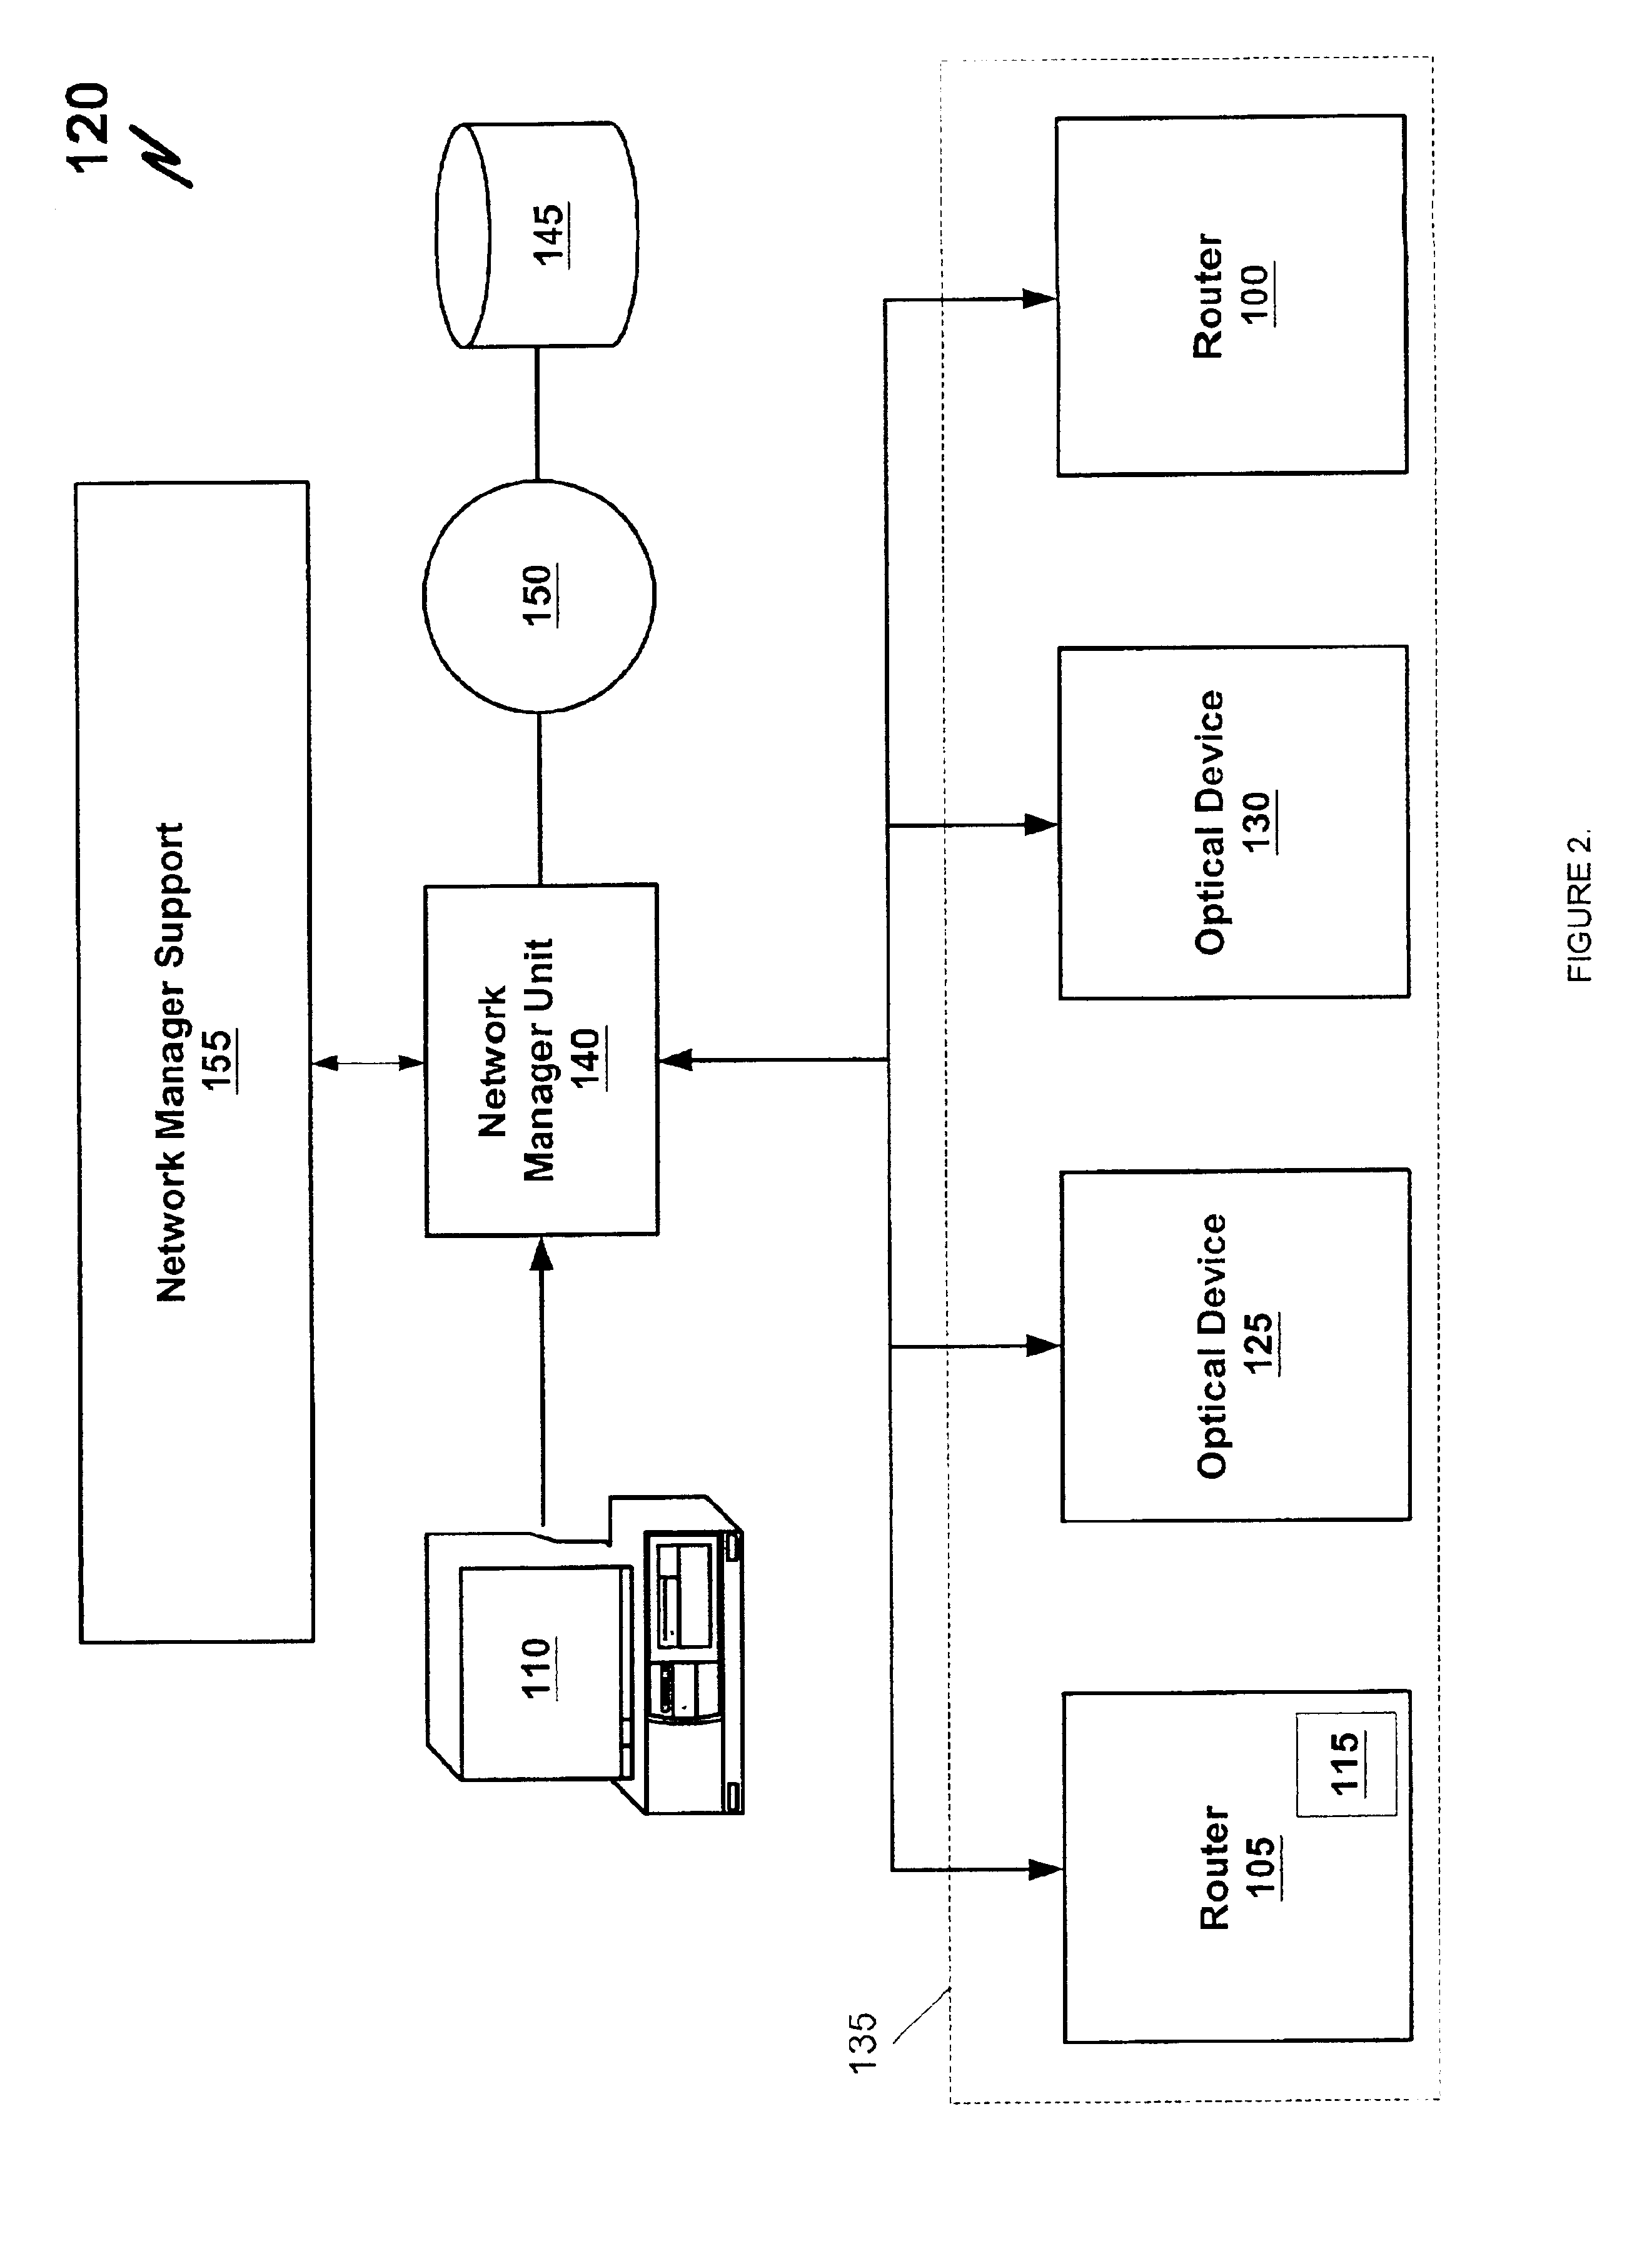 System and method for configuring a network device